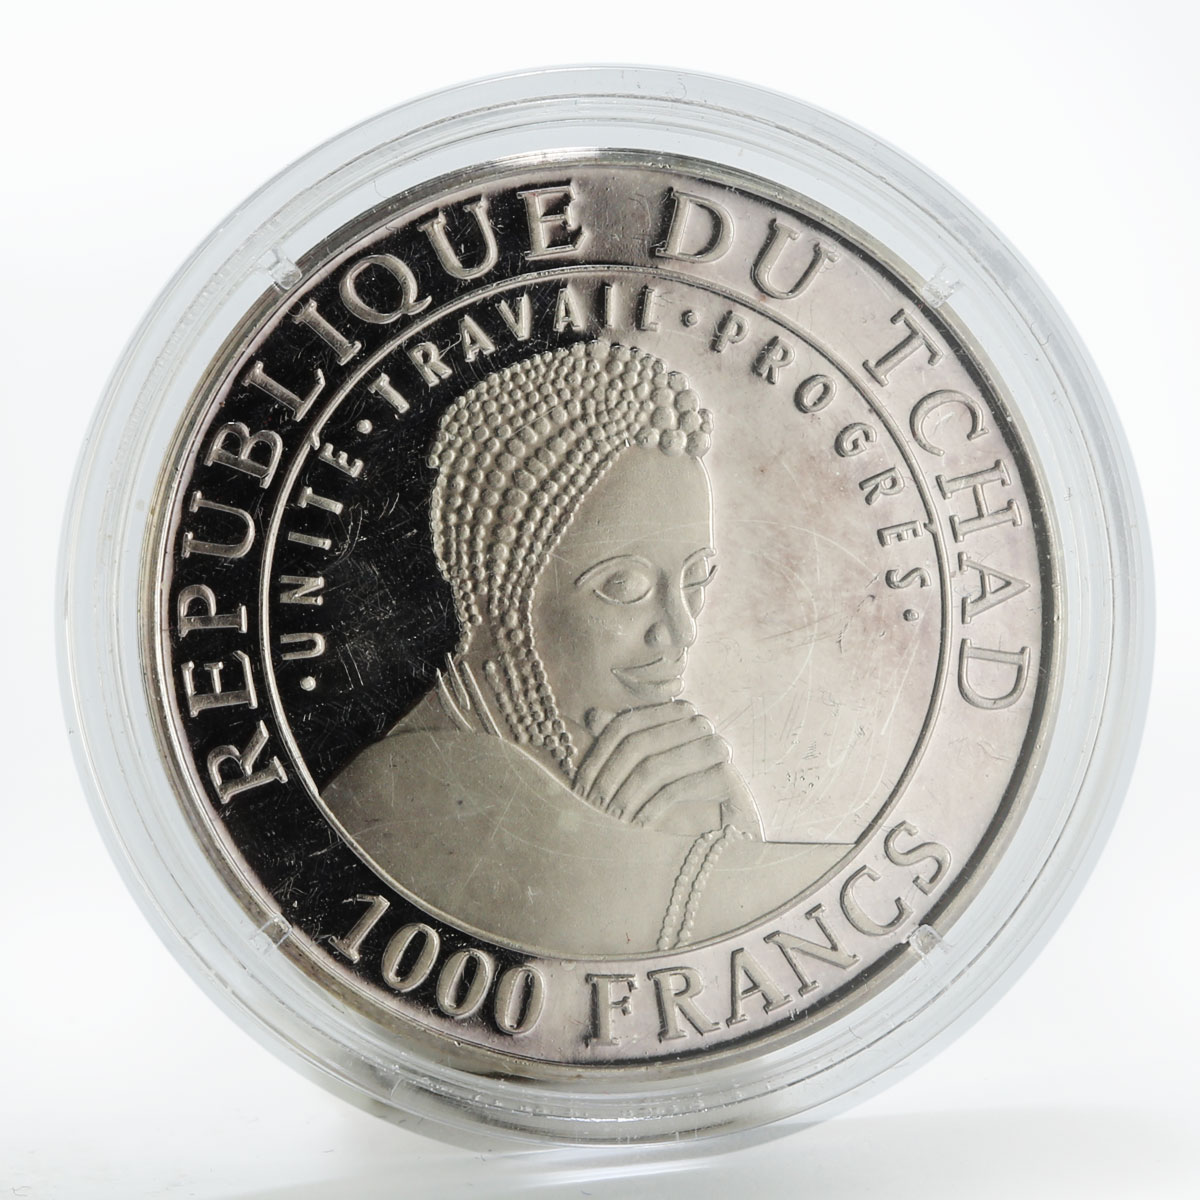 Chad 1000 francs Fortten Cultures - Jericho proof silver coin 1999